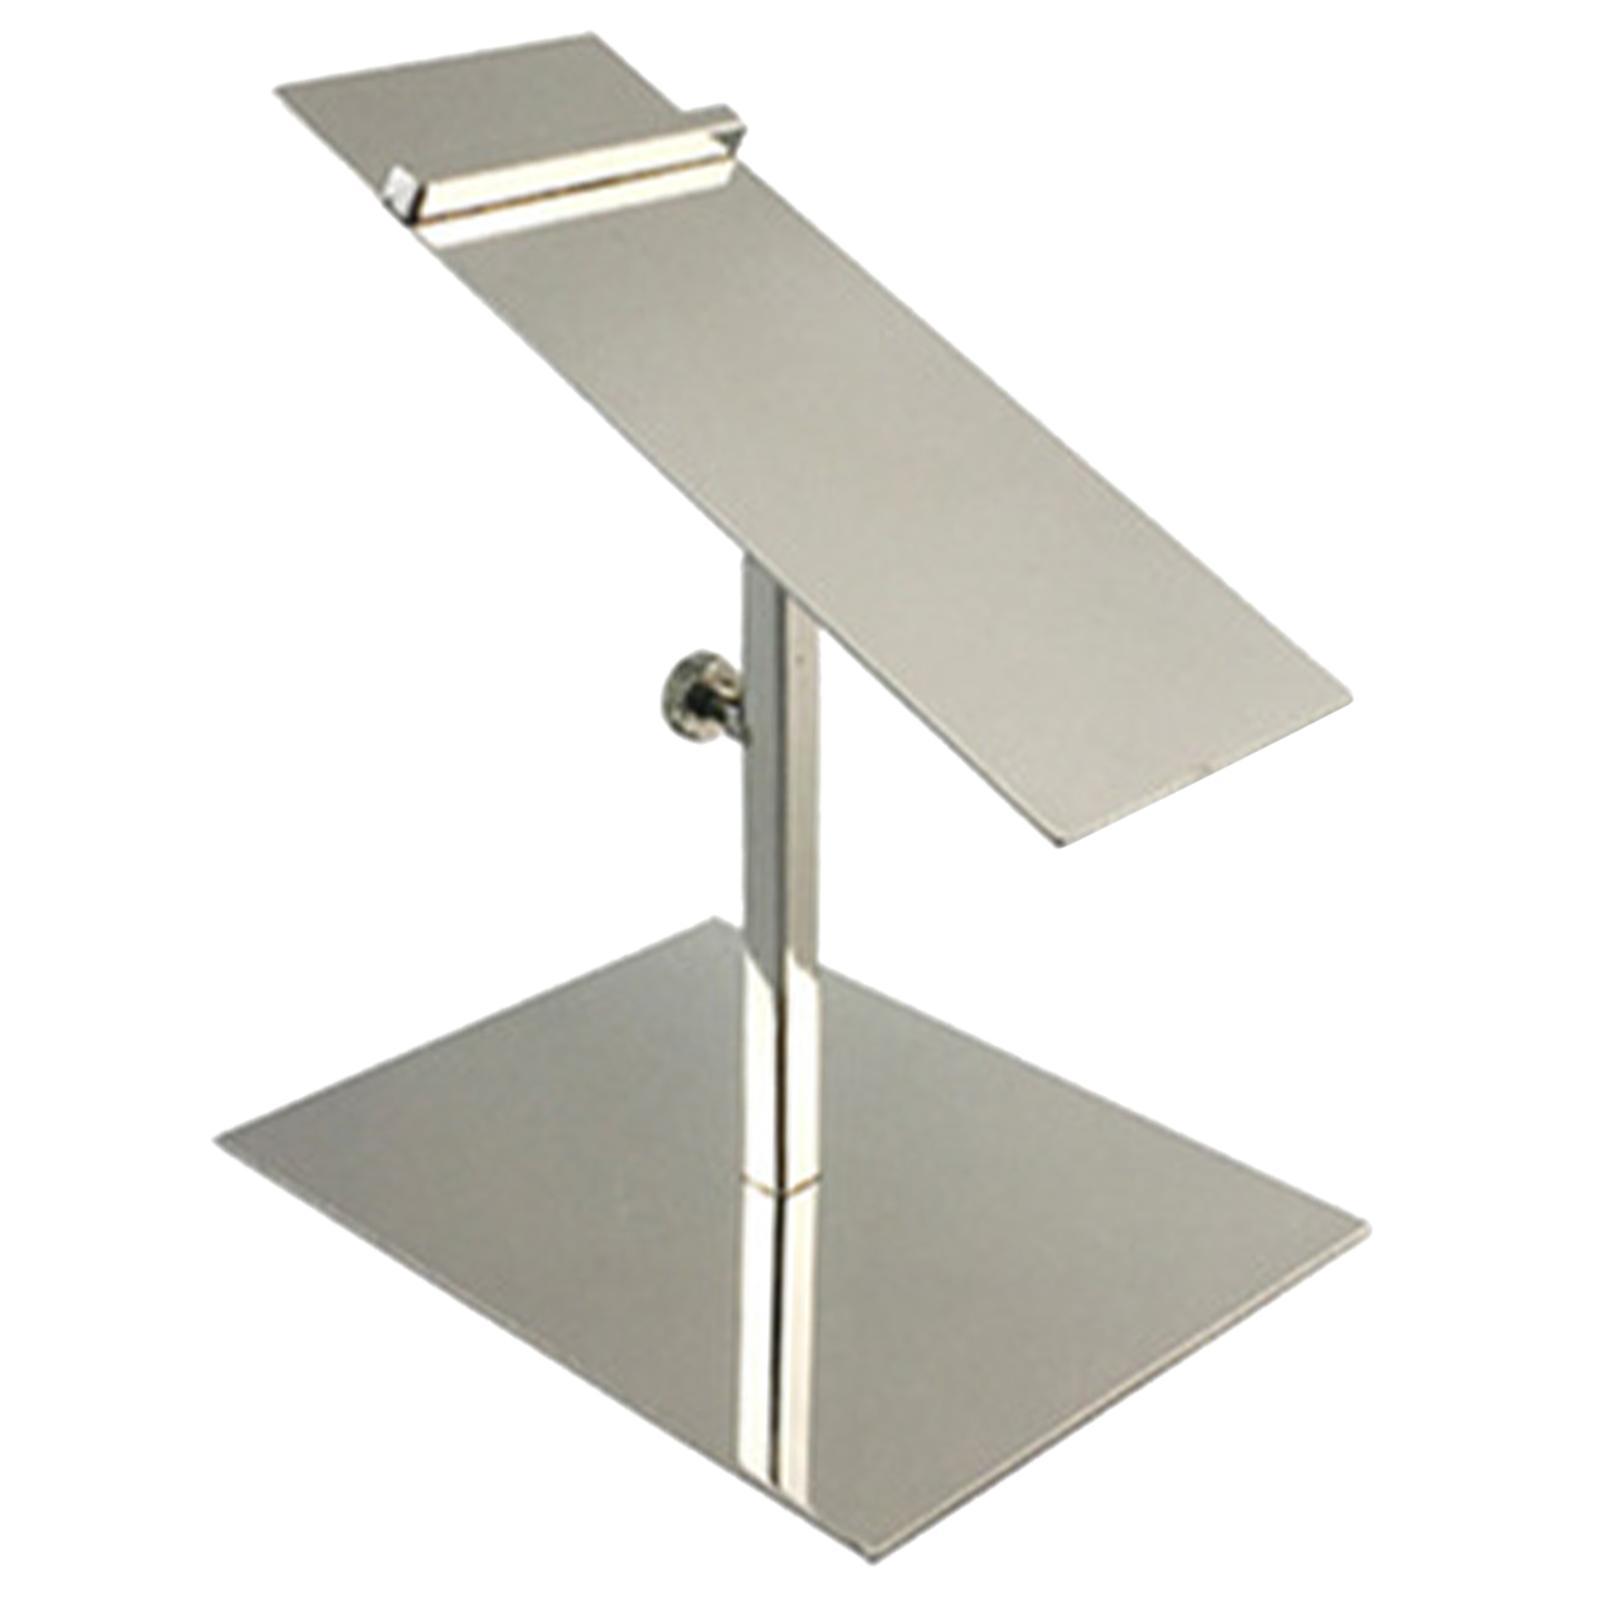 Stainless Steel Shoe Shelf Modern Non Slip Smooth for Home Clothing Shopping